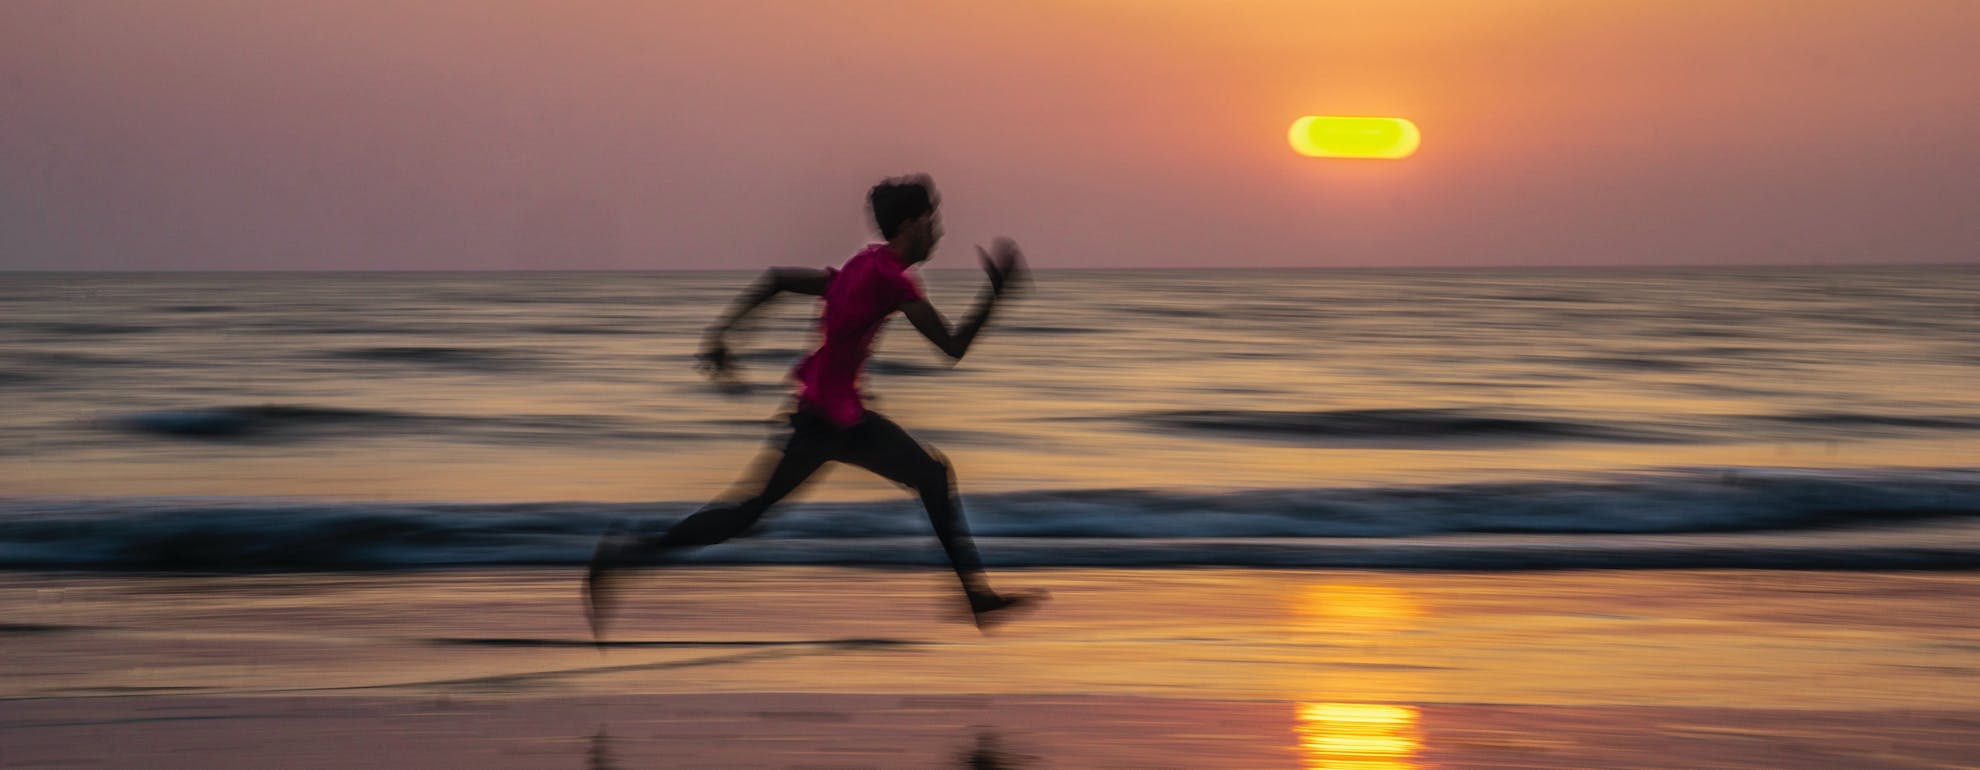 Training on the Beach: Tips and Benefits for Runners